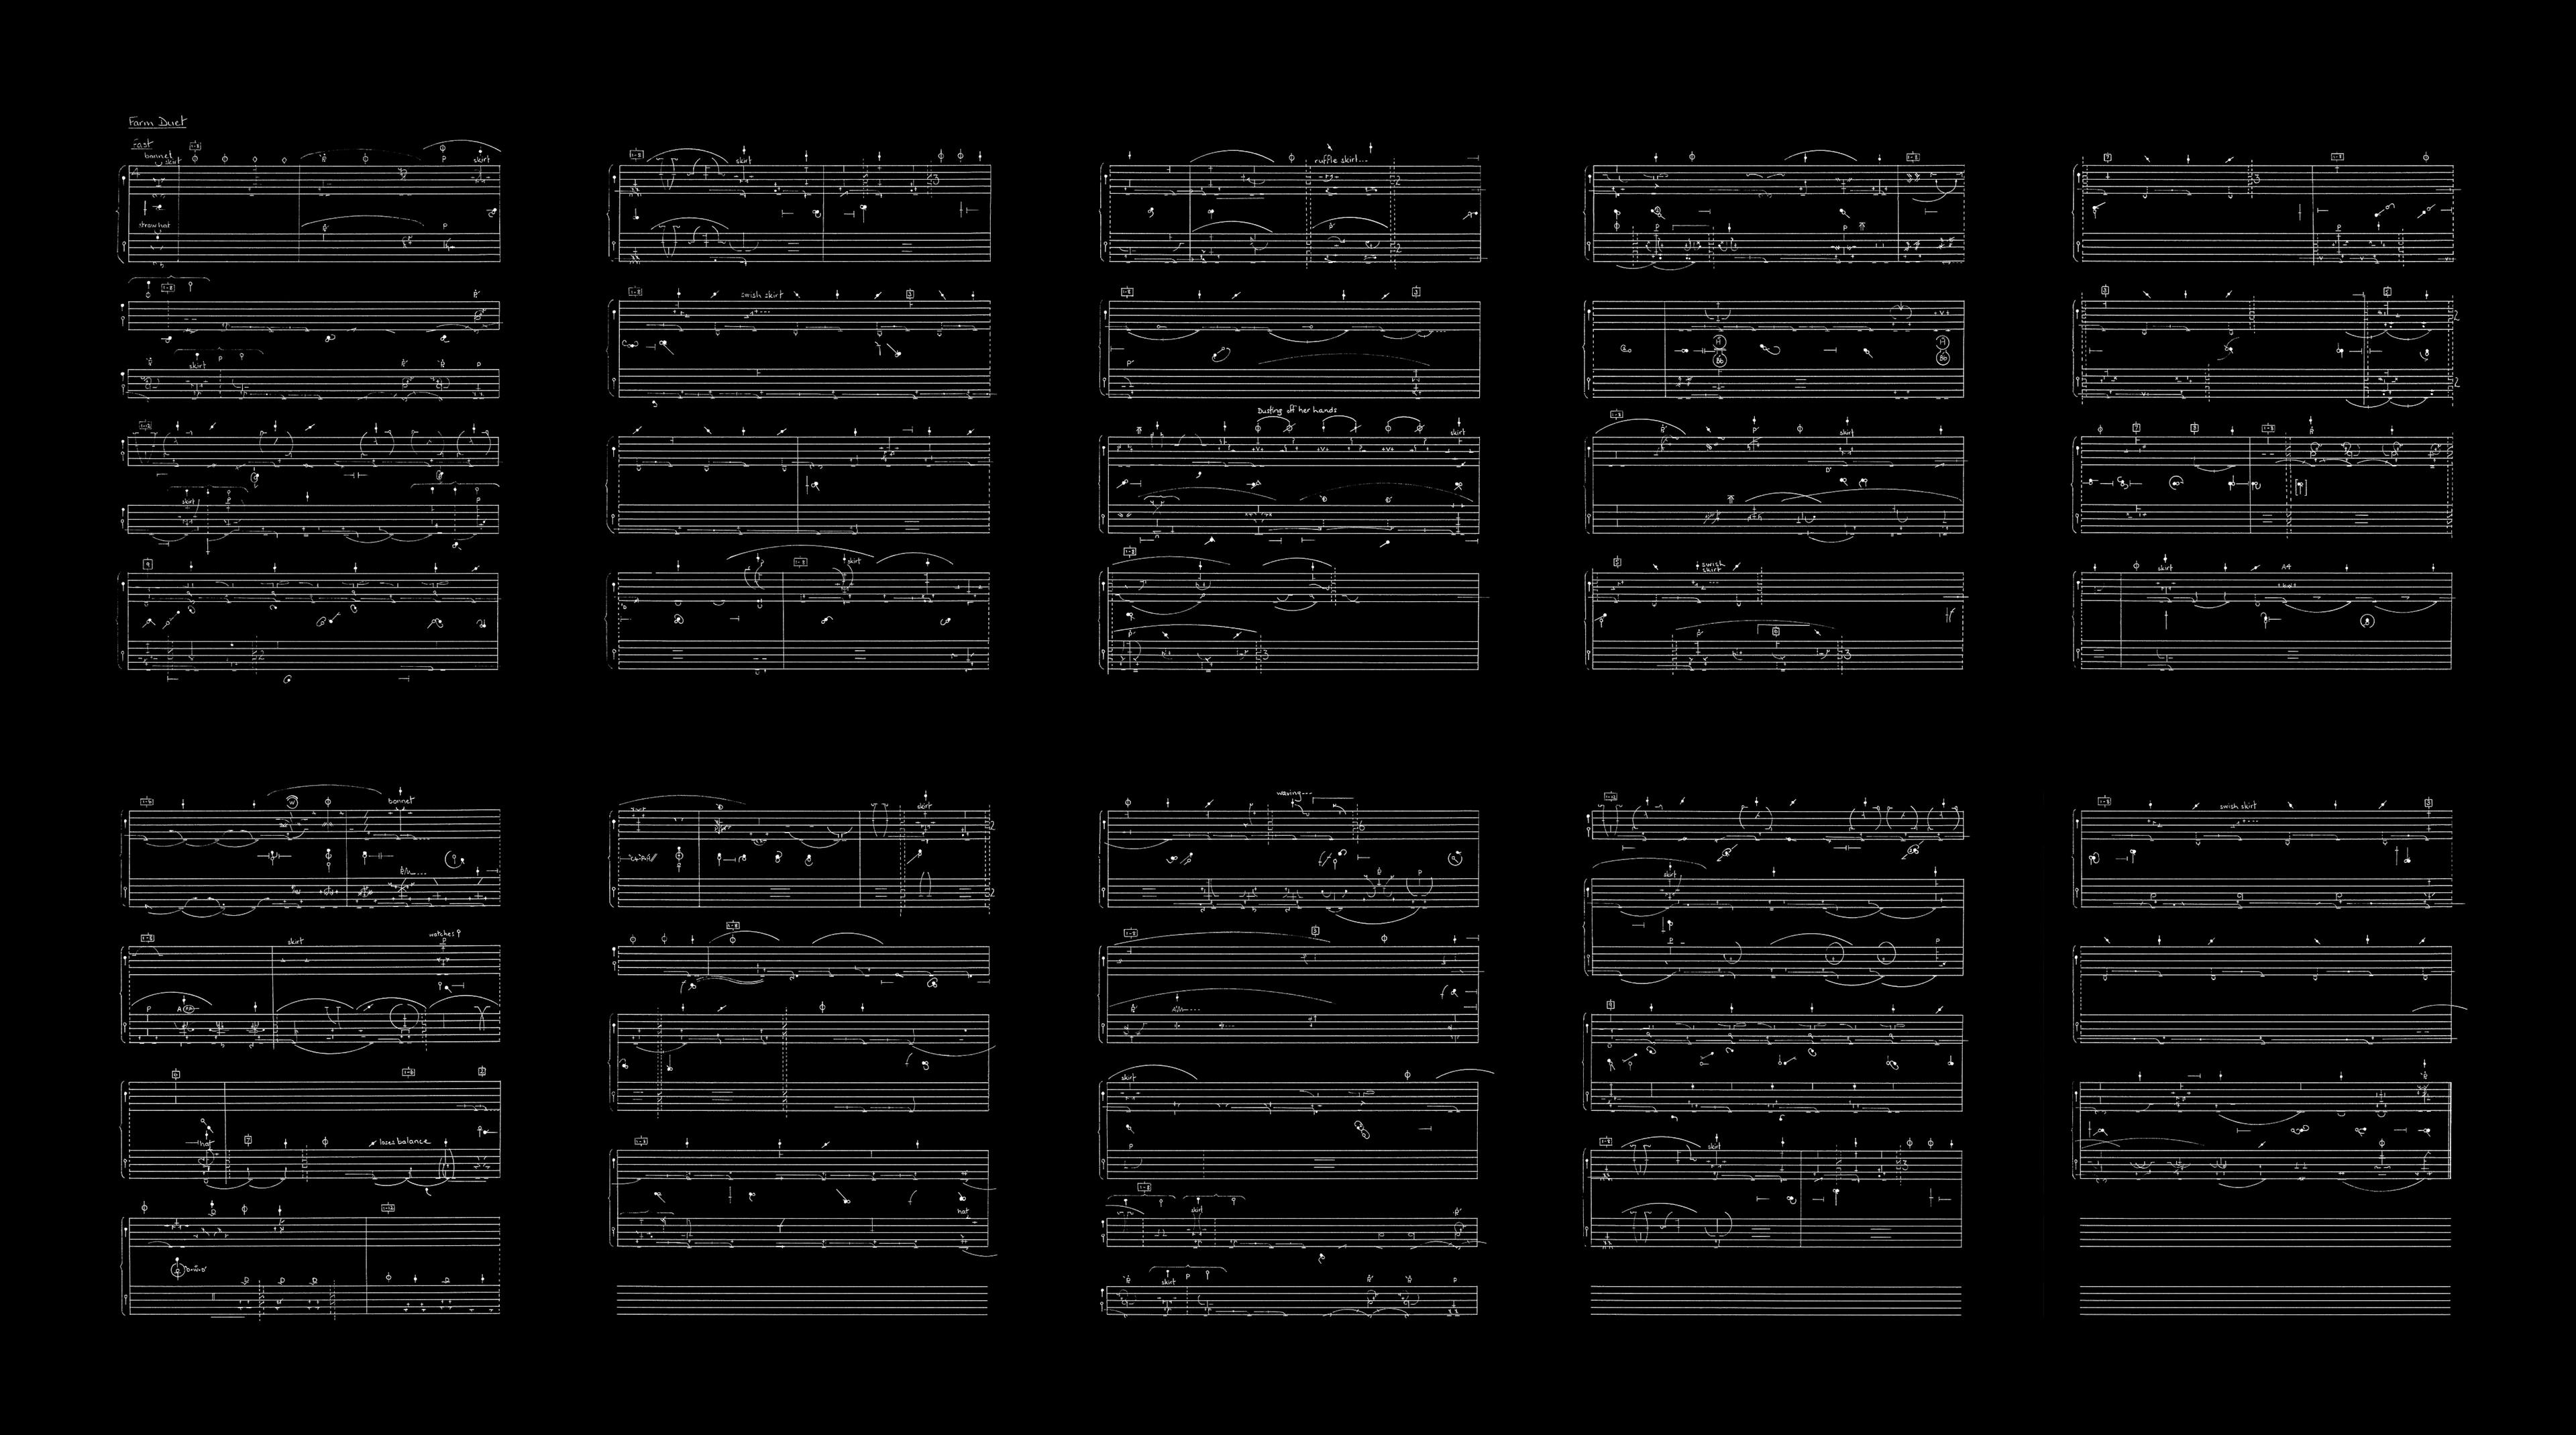 An image depicting Benesh notation dance scores. The scores are white on a solid black background and resemble sheet music. “Farm Duet.” is written above the score on the top left.